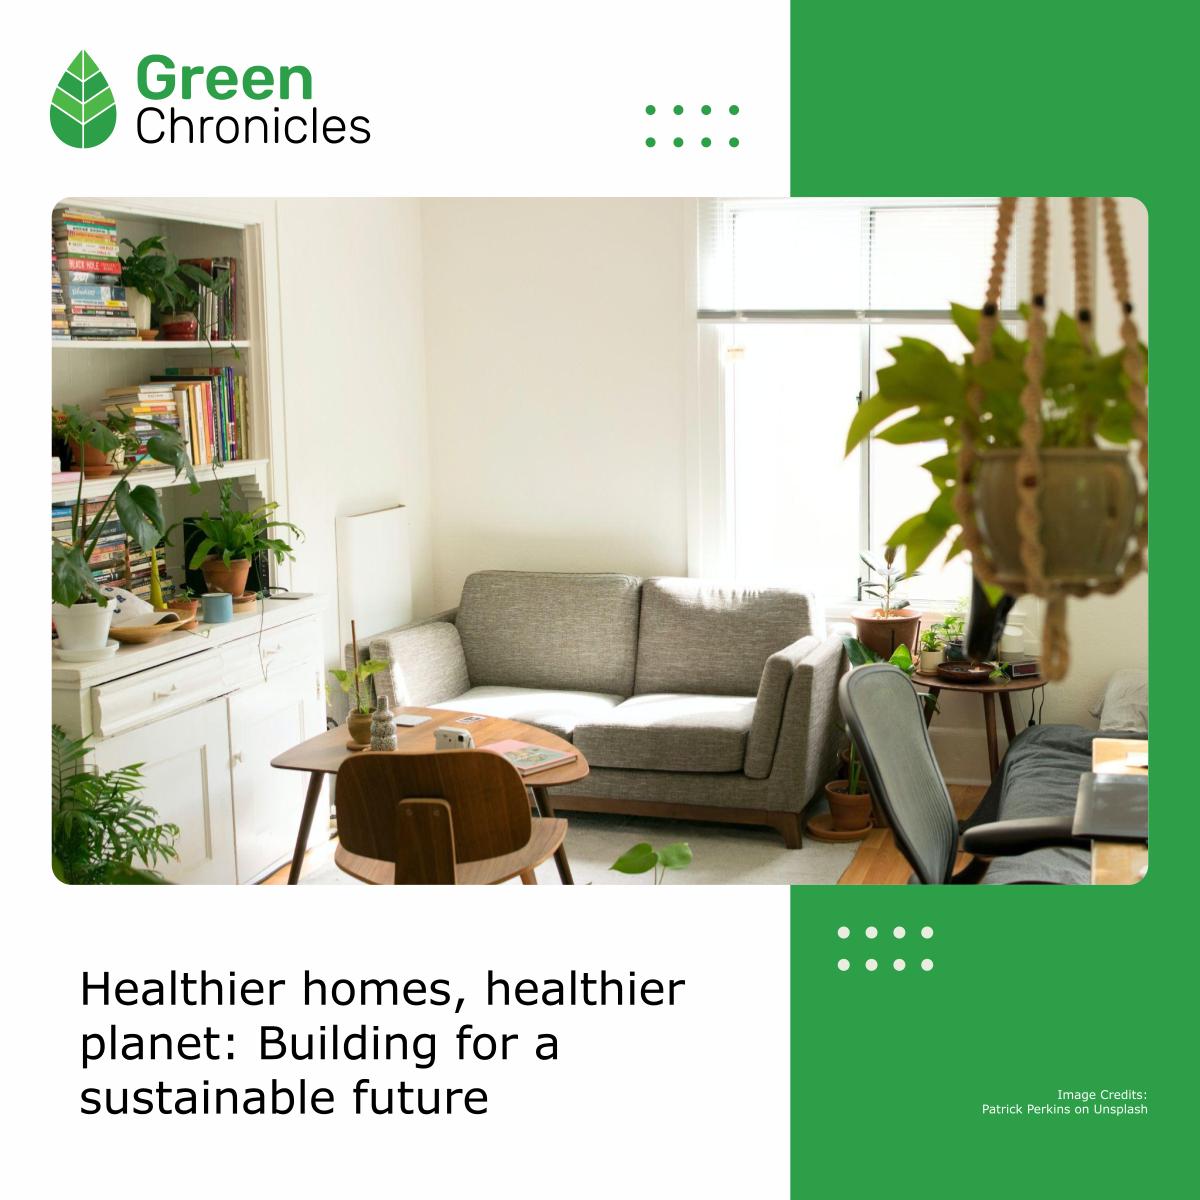 🏡 Explore how making our homes healthier can contribute to a more sustainable future for all.

Read our latest blog here:
greenchronicles.org/healthier-home…

#greenhomes #healthyhomes #sustainablefuture #sustainableliving